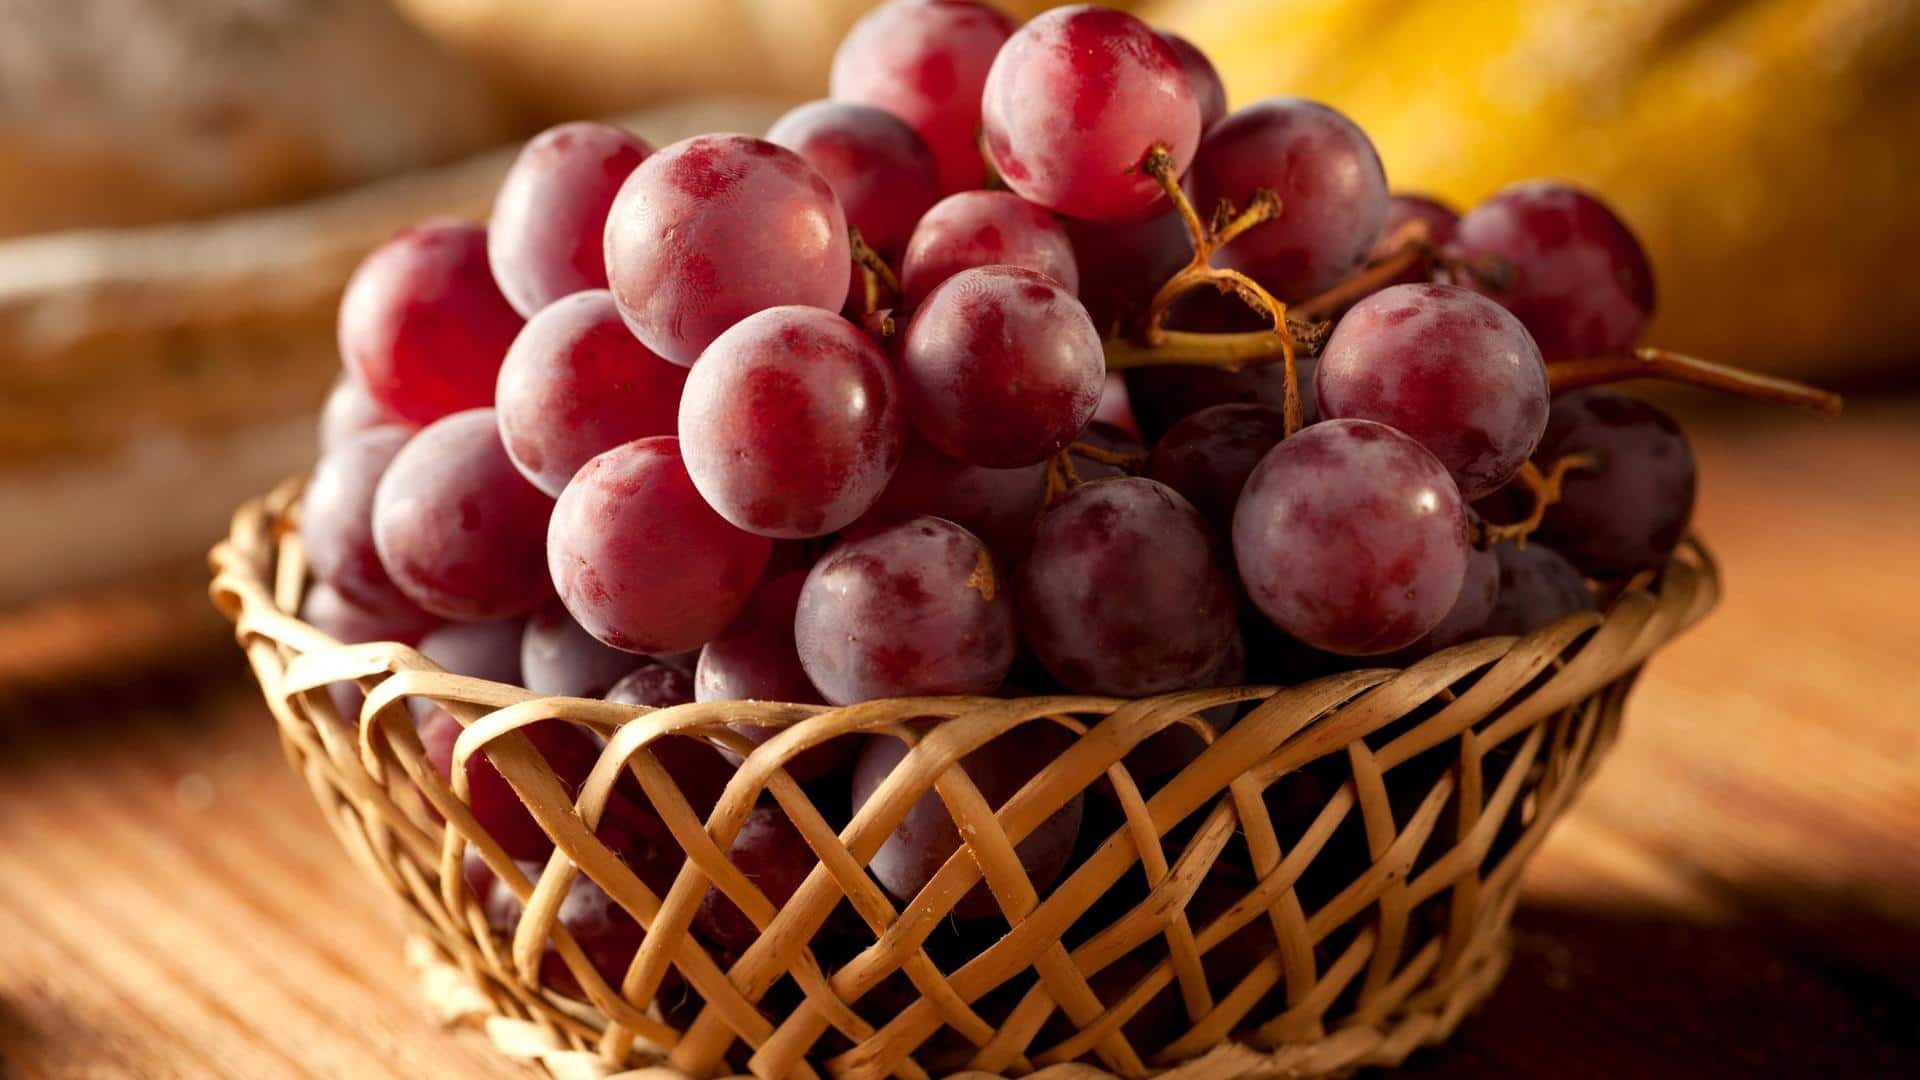 Reasons why you should include red grapes in your diet